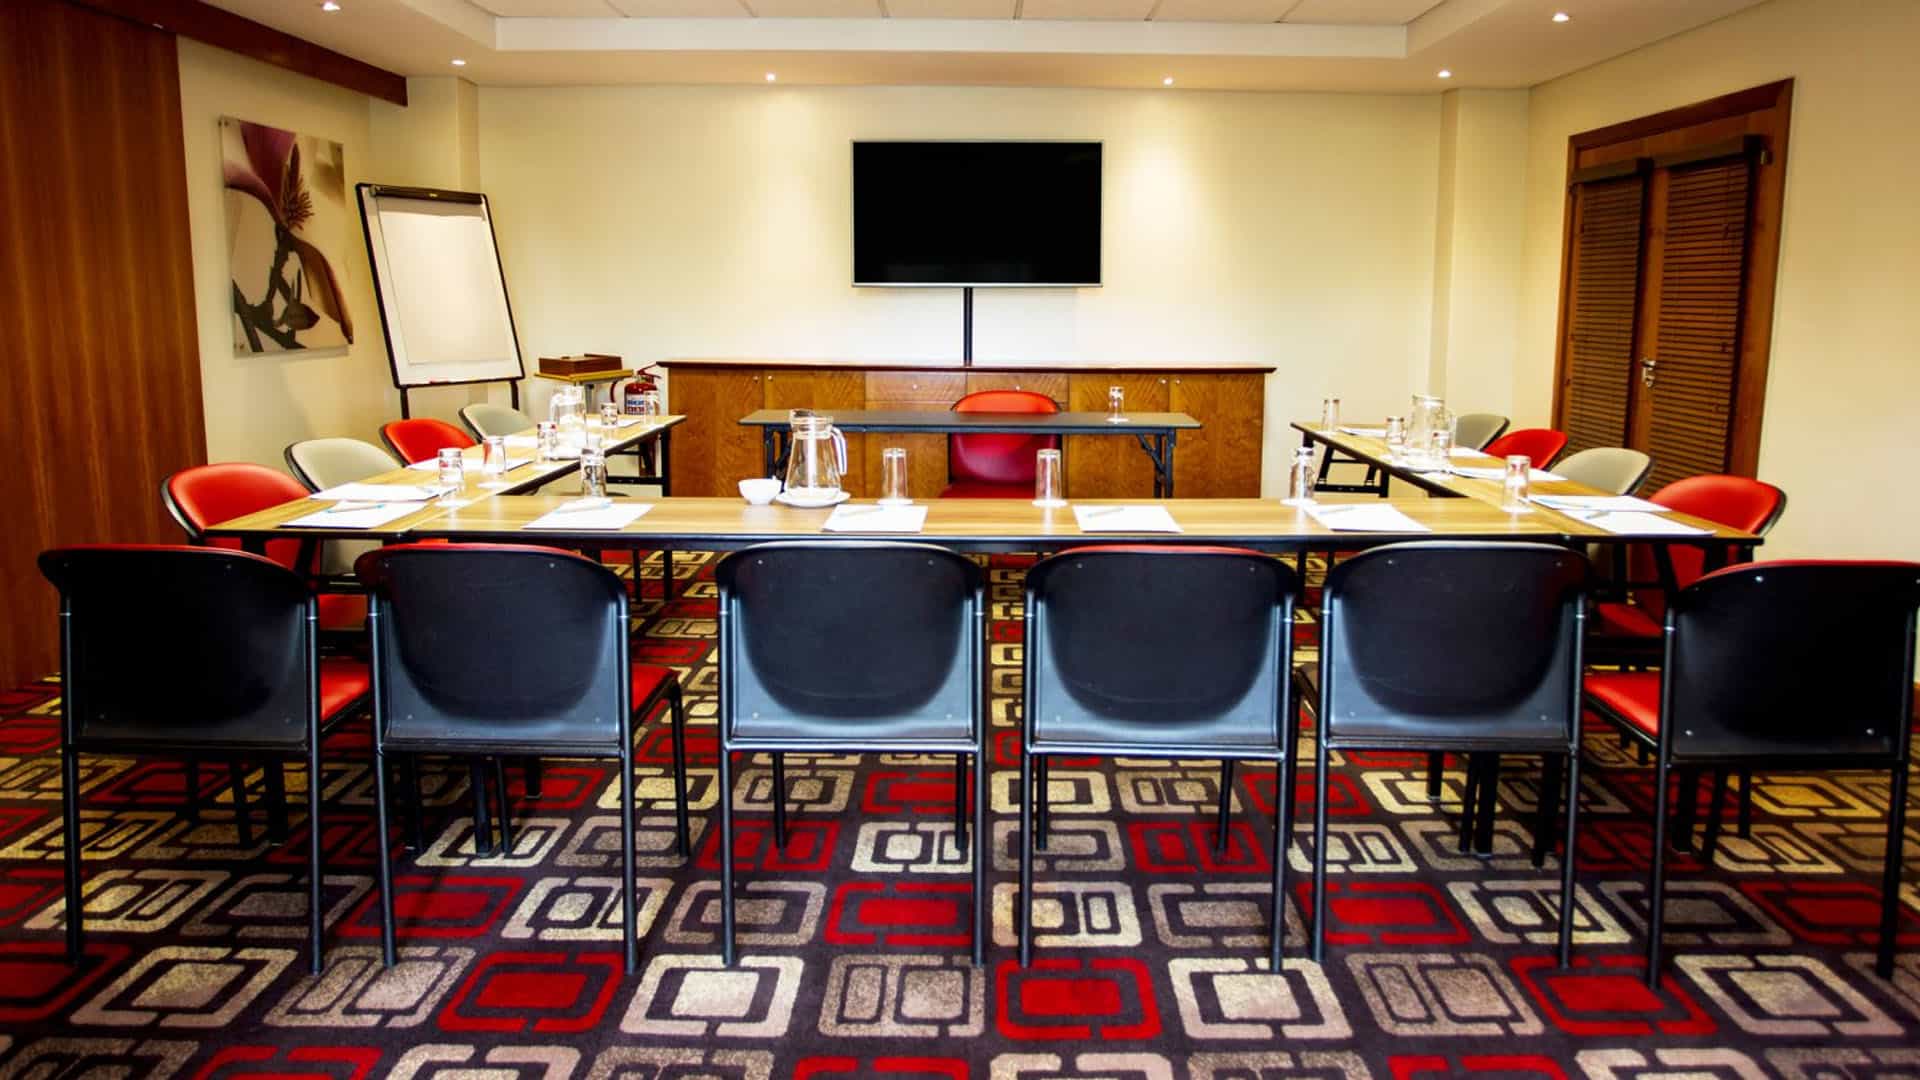 The RidgePoint Hotel’s Meeting Room